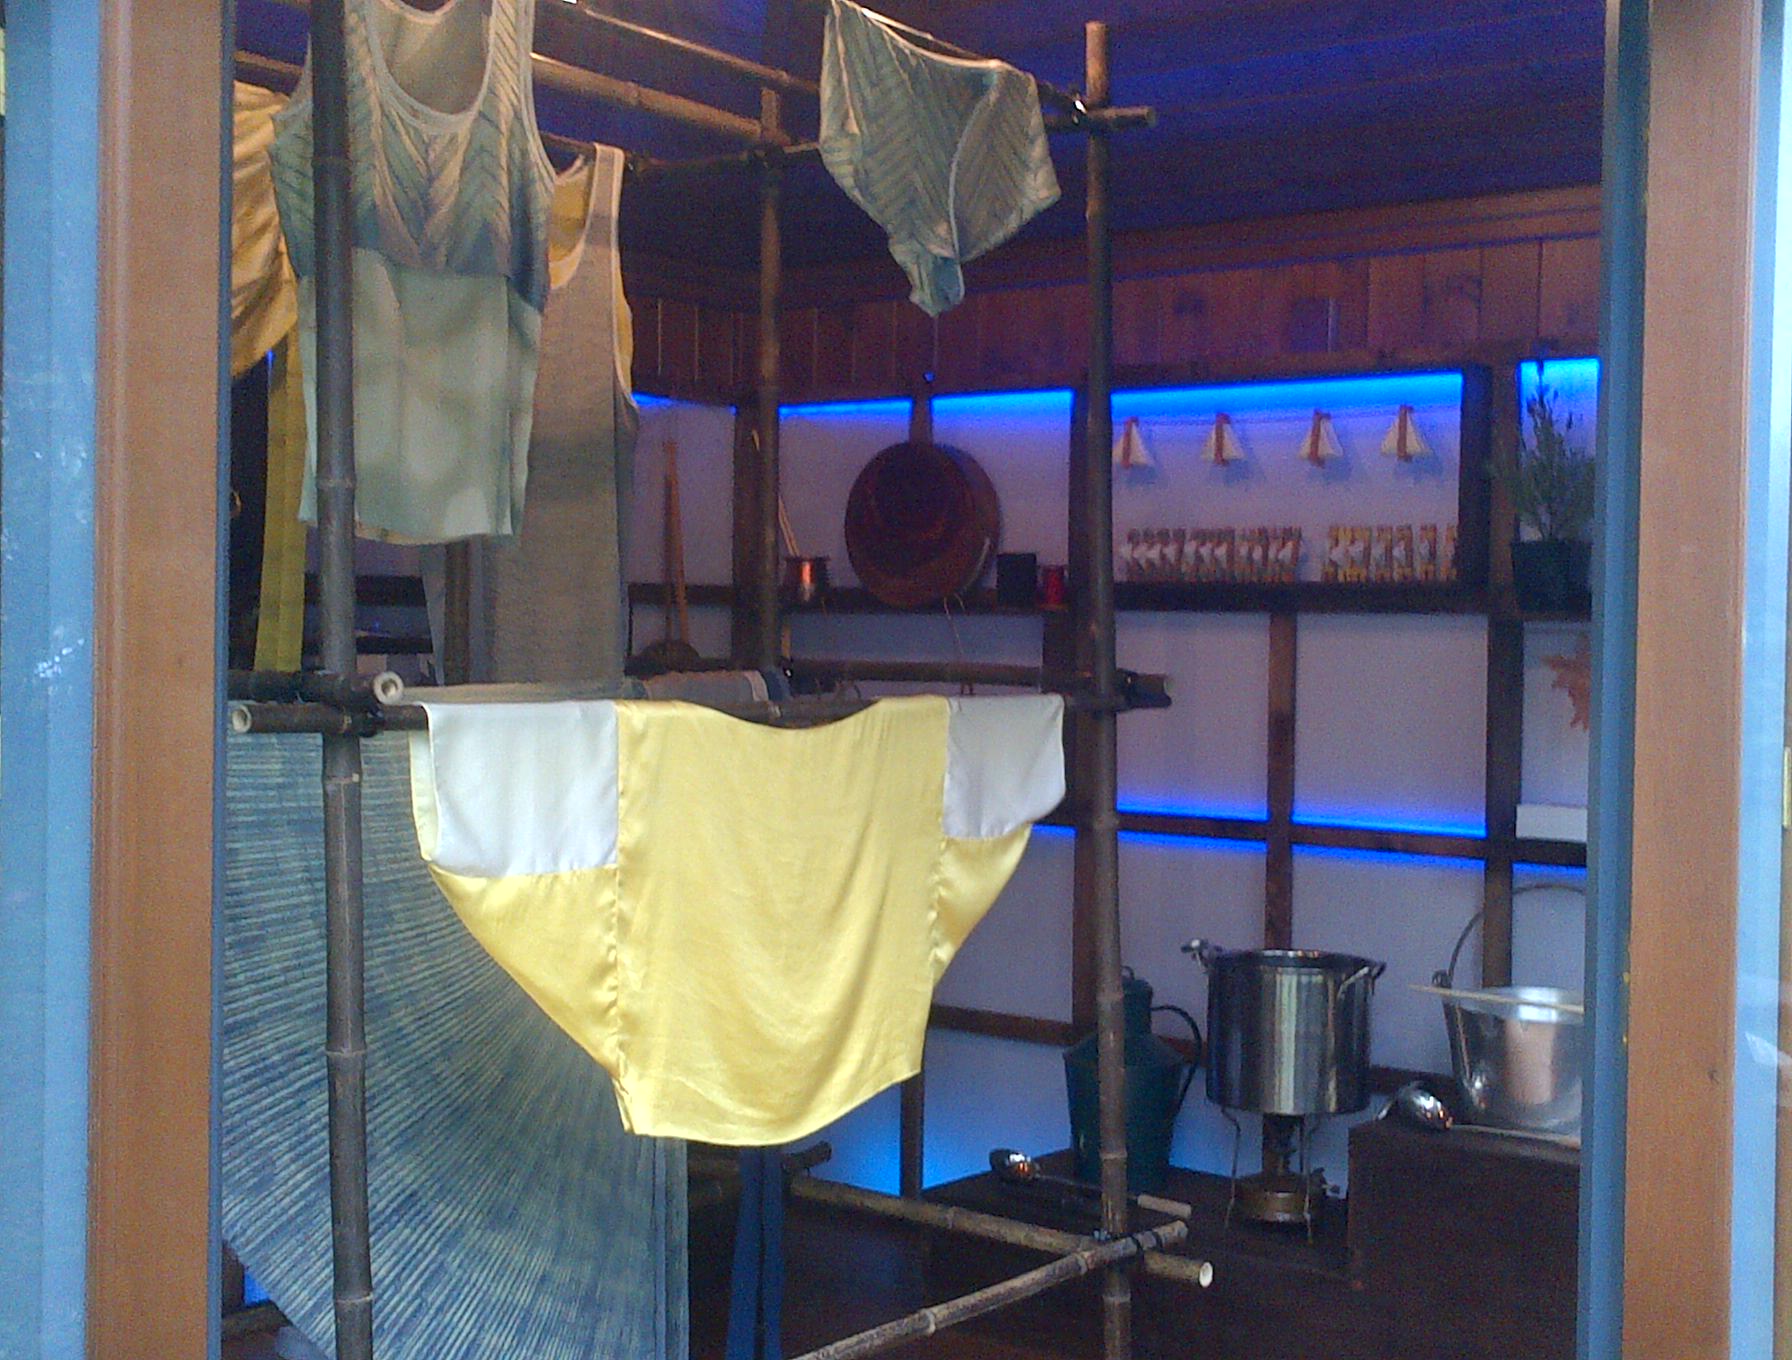 Naturally dyed textiles and clothing design were exhibited in the LCF Artisan Retreat on bamboo poles.